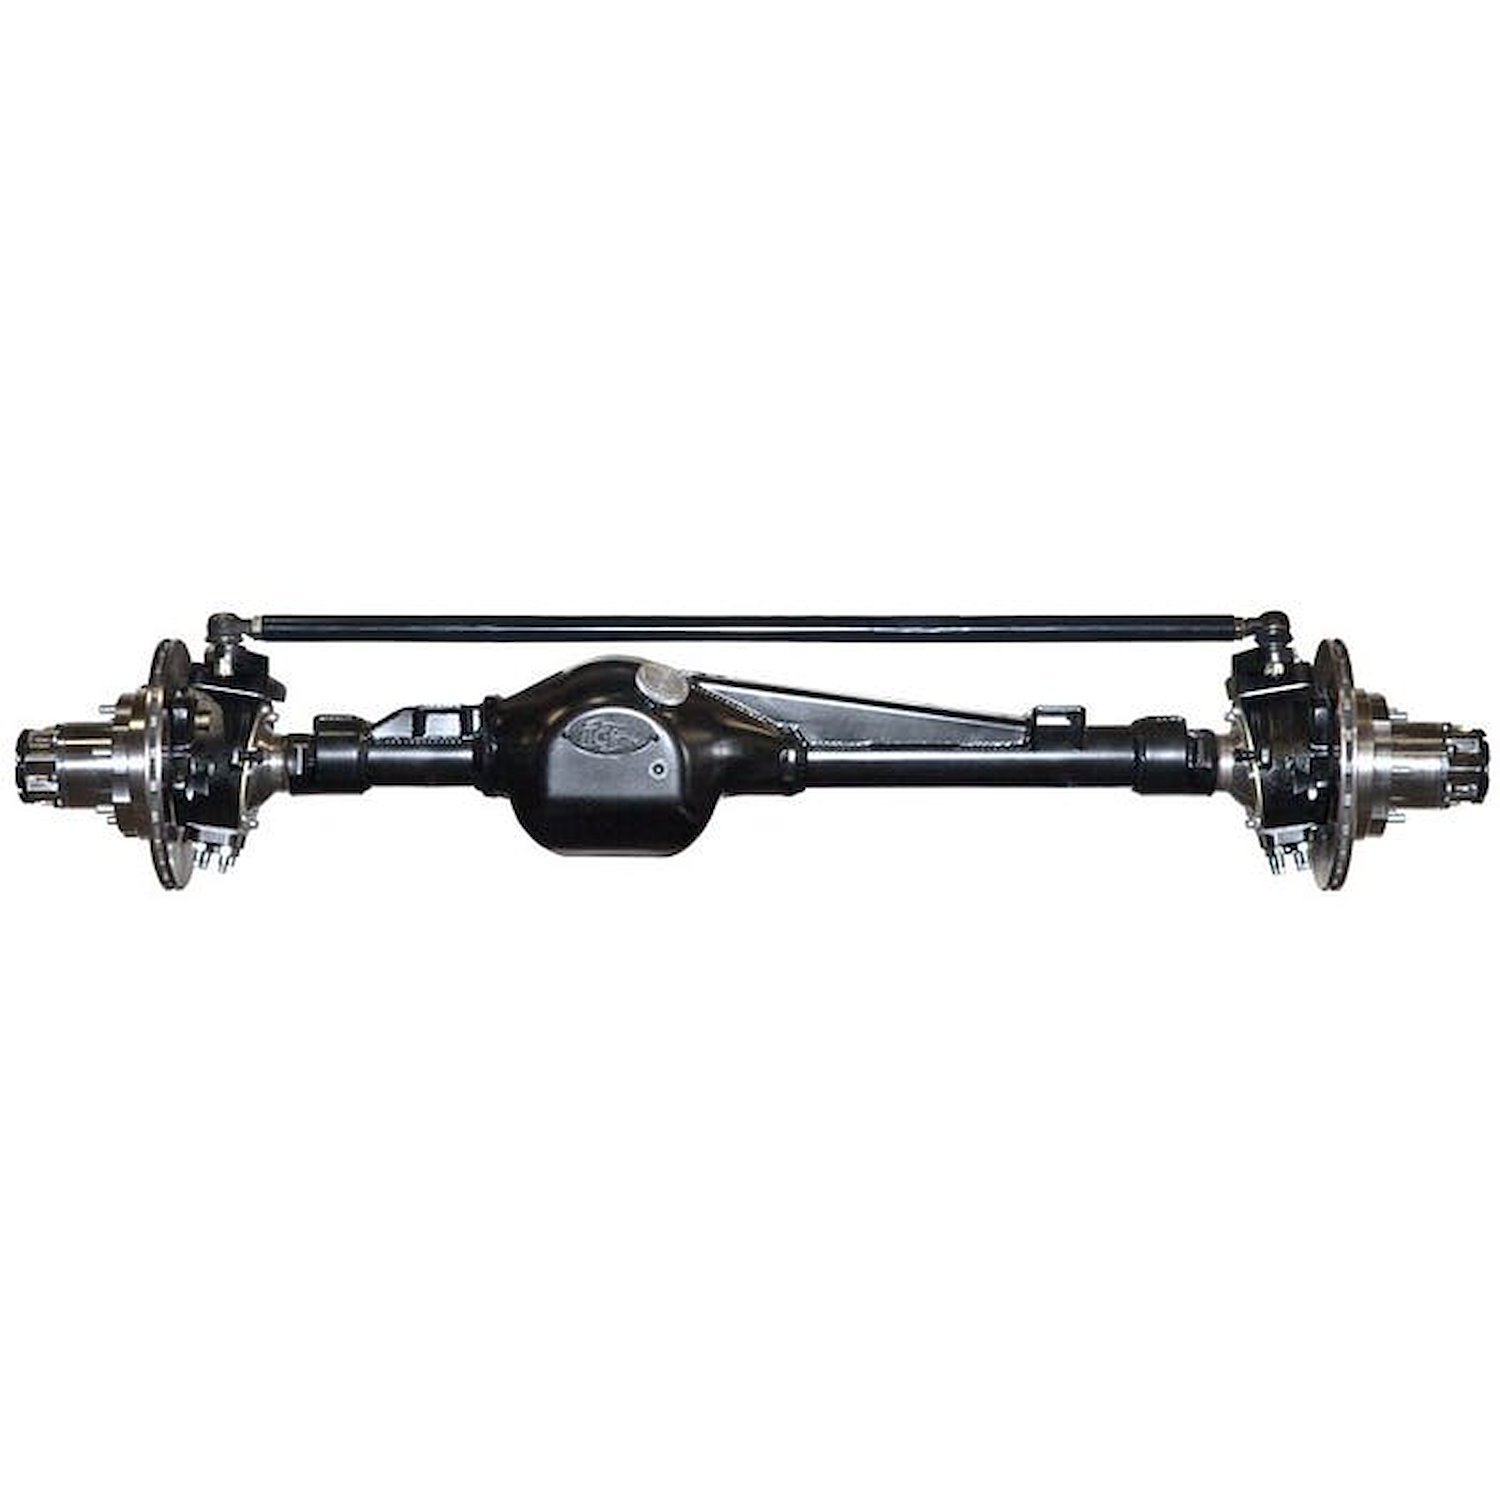 301604-1-KIT Rock Assault Fully-Built Front Axles, +3 Width, LHD, V6, 5.29, Grizzly, Creeper Flanges, Toyota